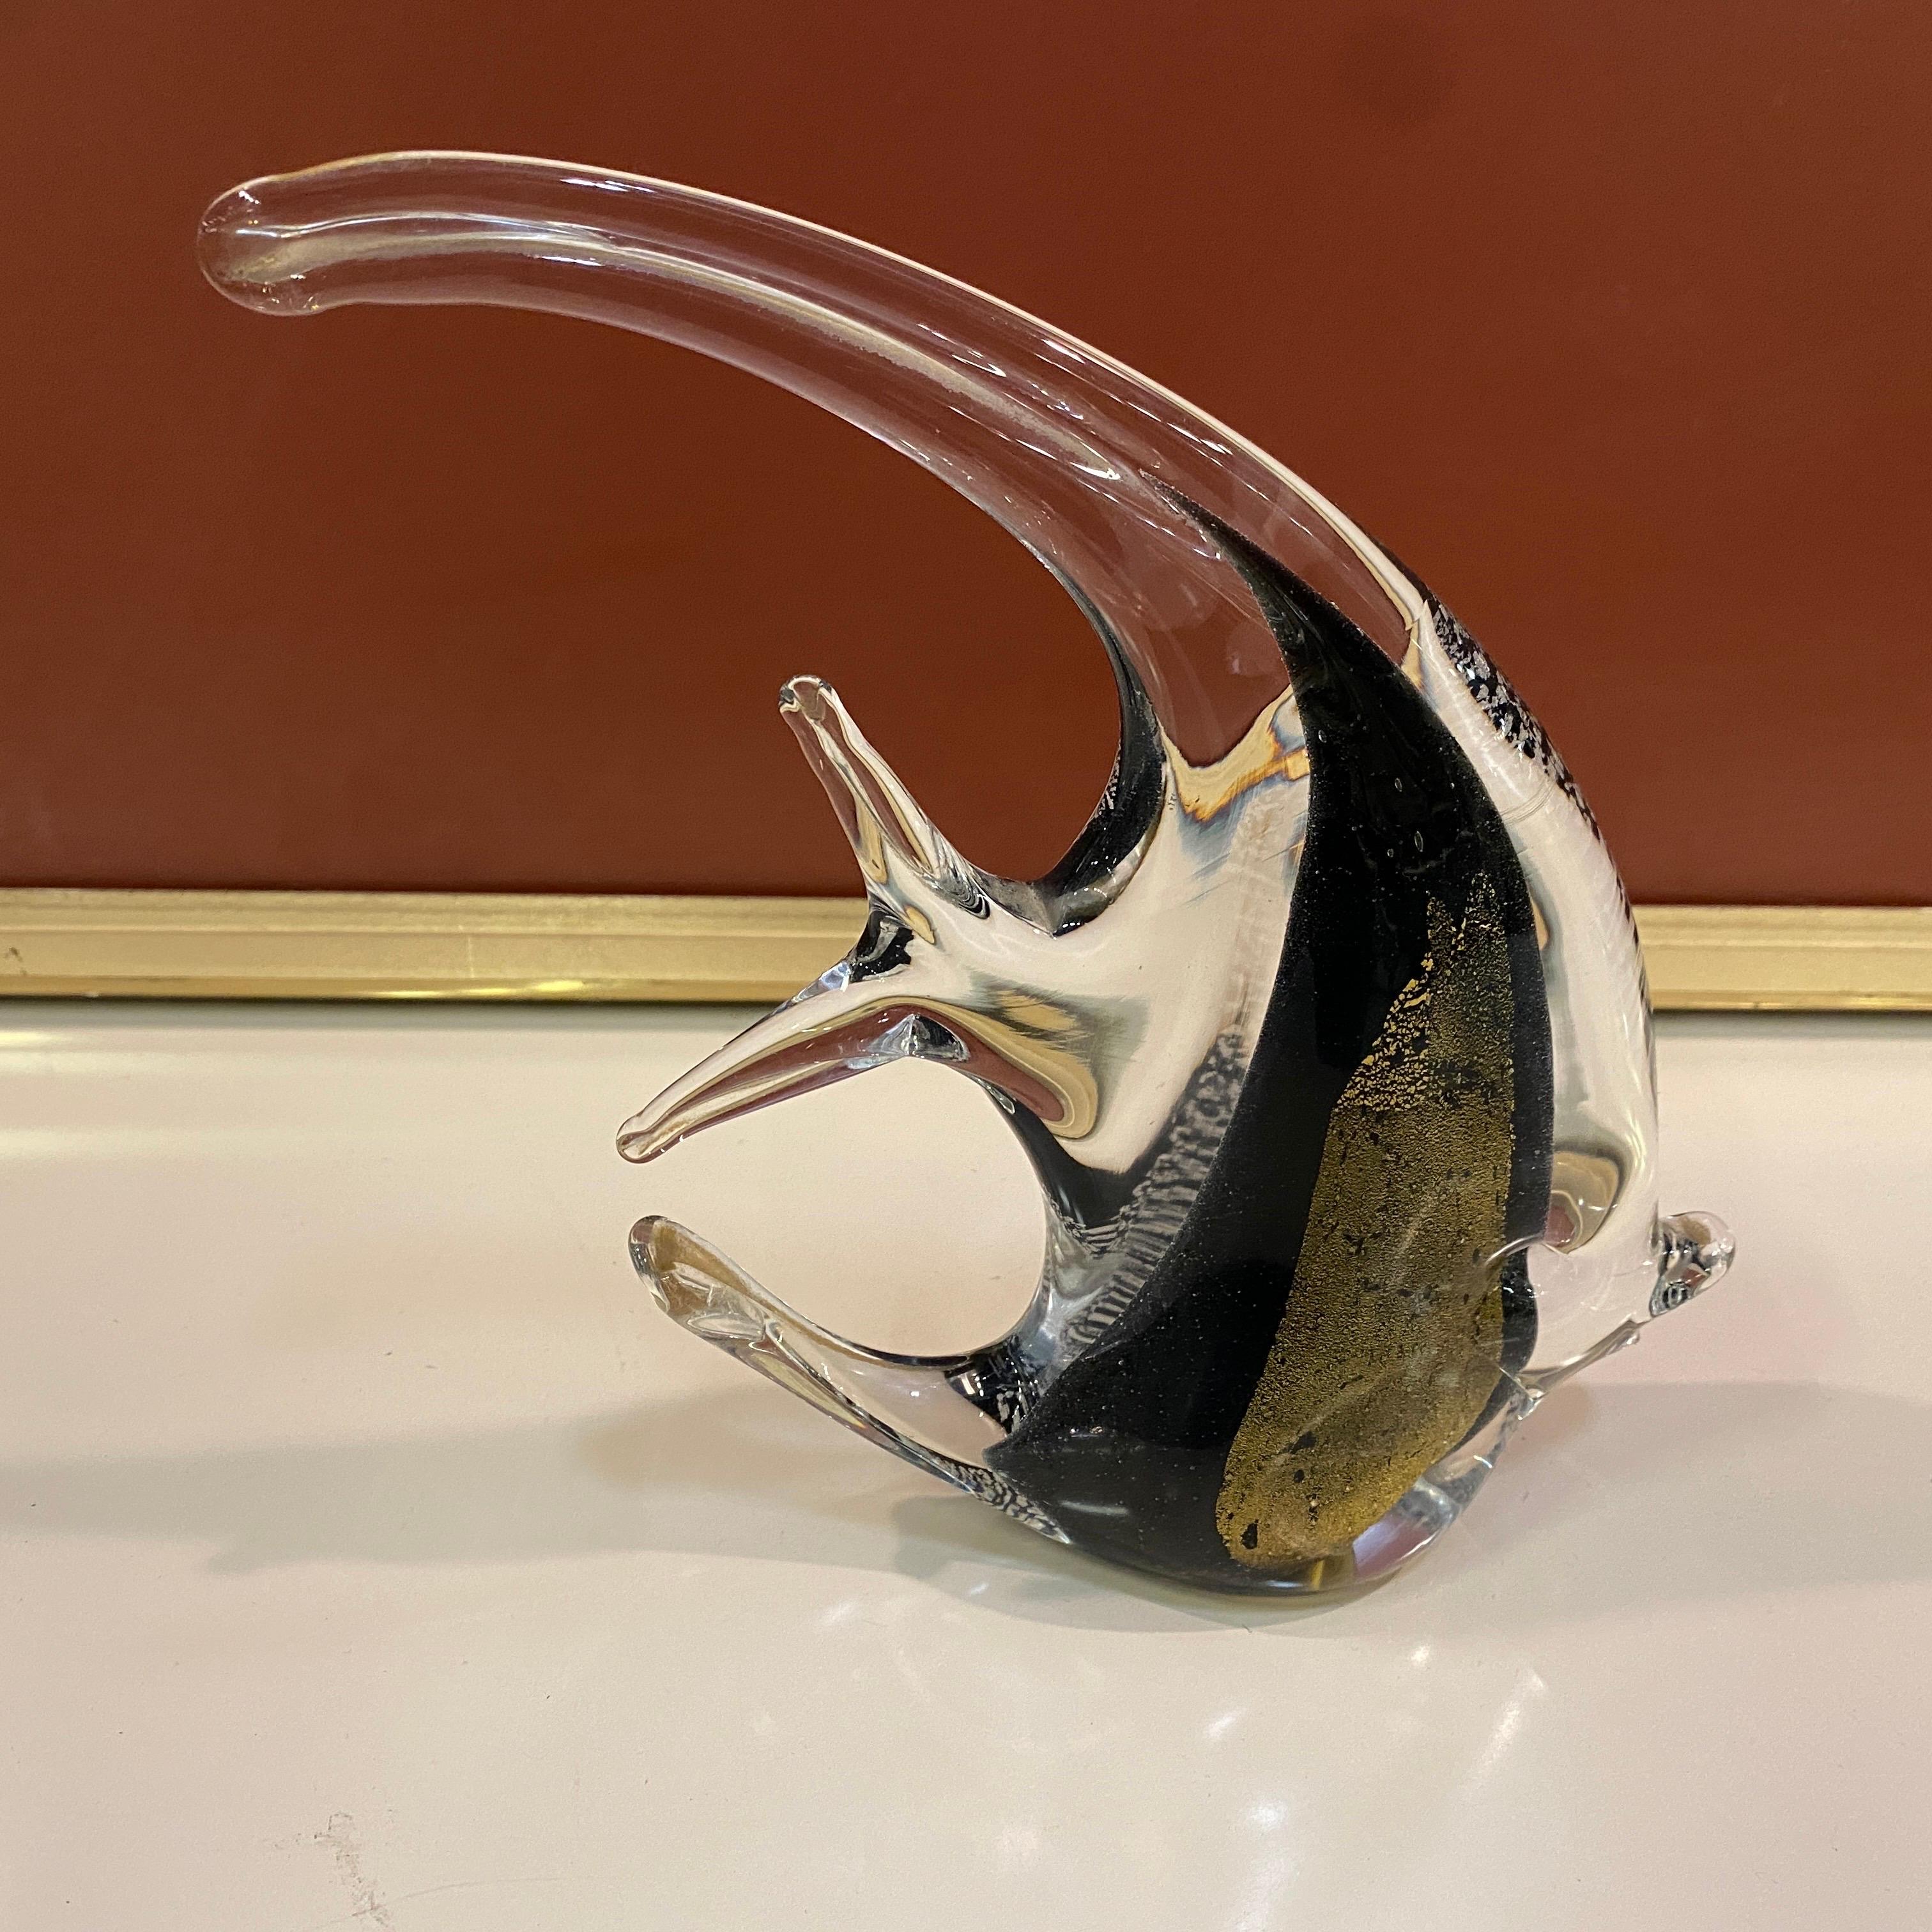 1980s Modernist Murano Glass Sculpture of Tropical Fish by Seguso For Sale 4